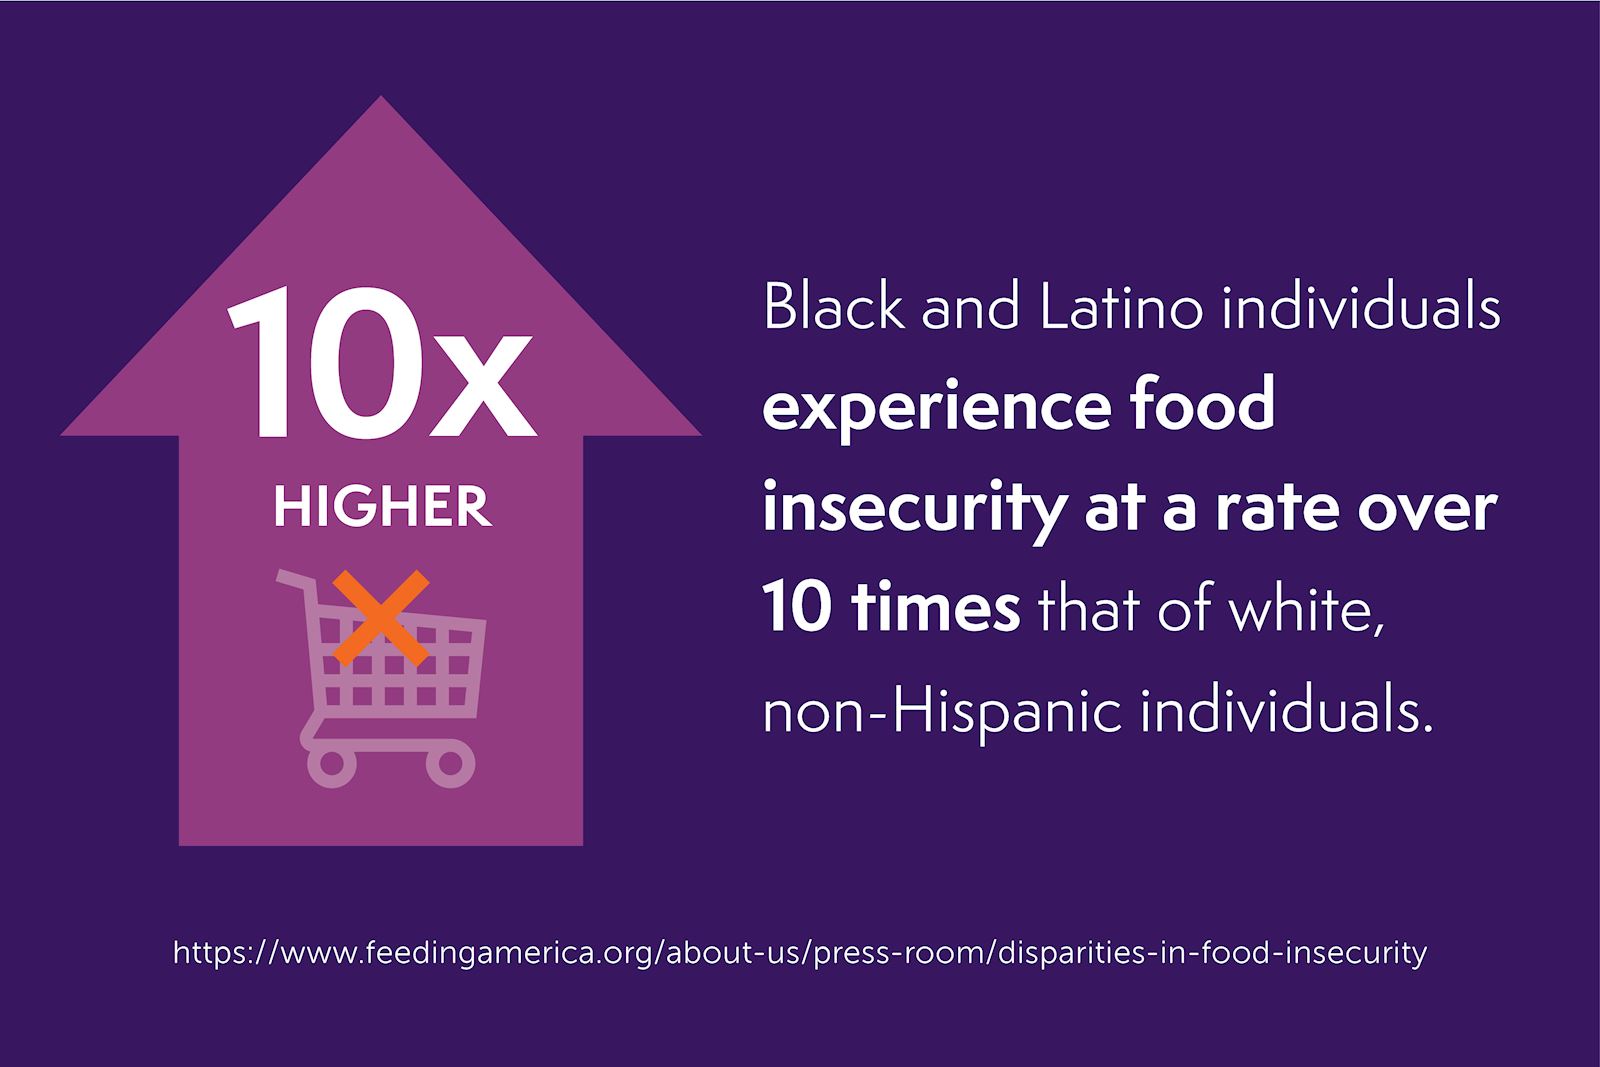 Home-delivered meals can help close health equity gaps